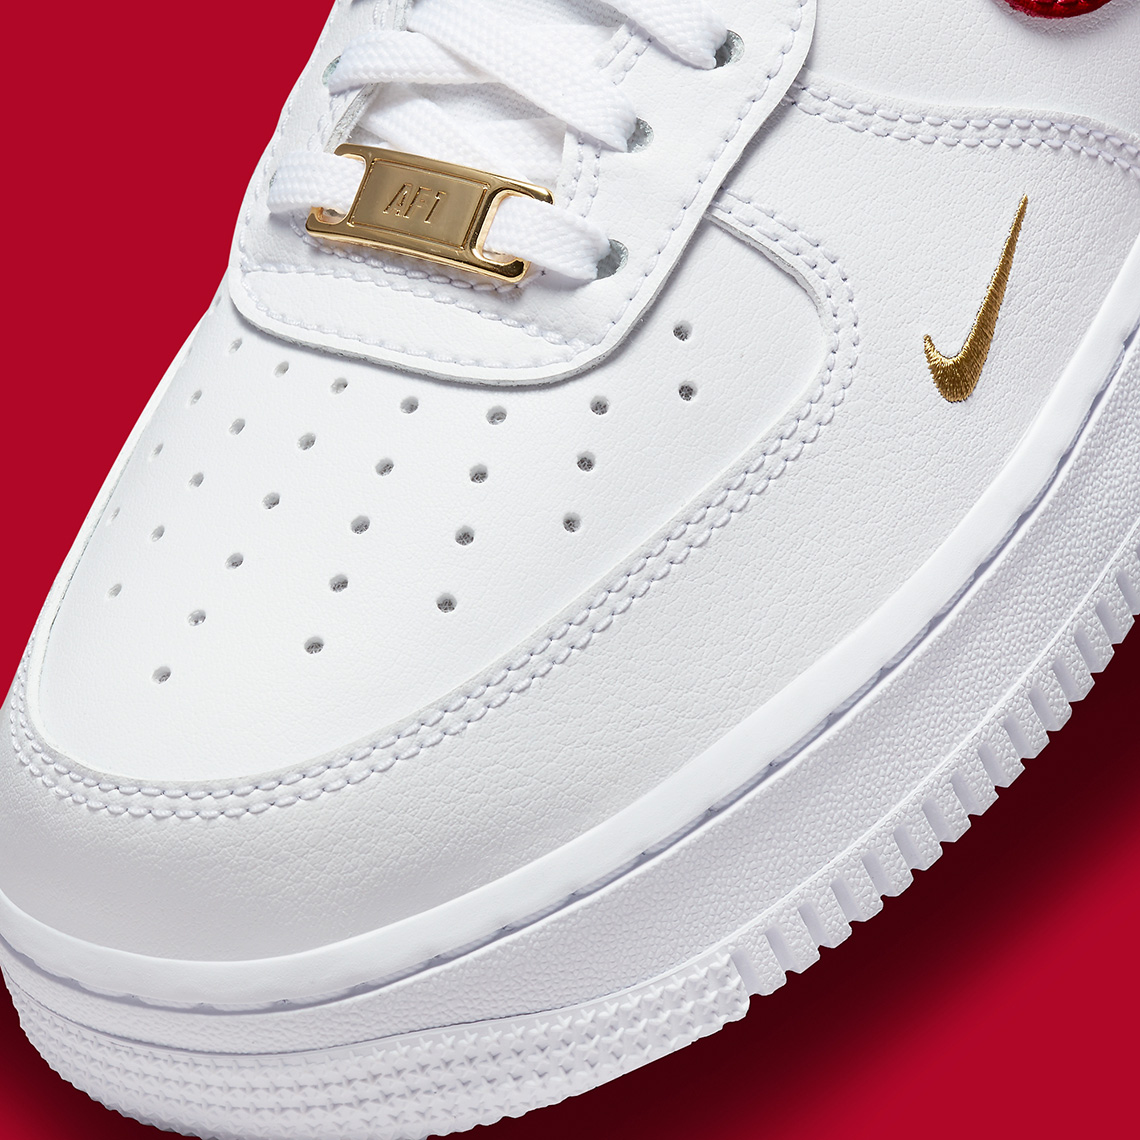 Nike Air Force 1 Red Gold CZ0270-104 | SneakerNews.com